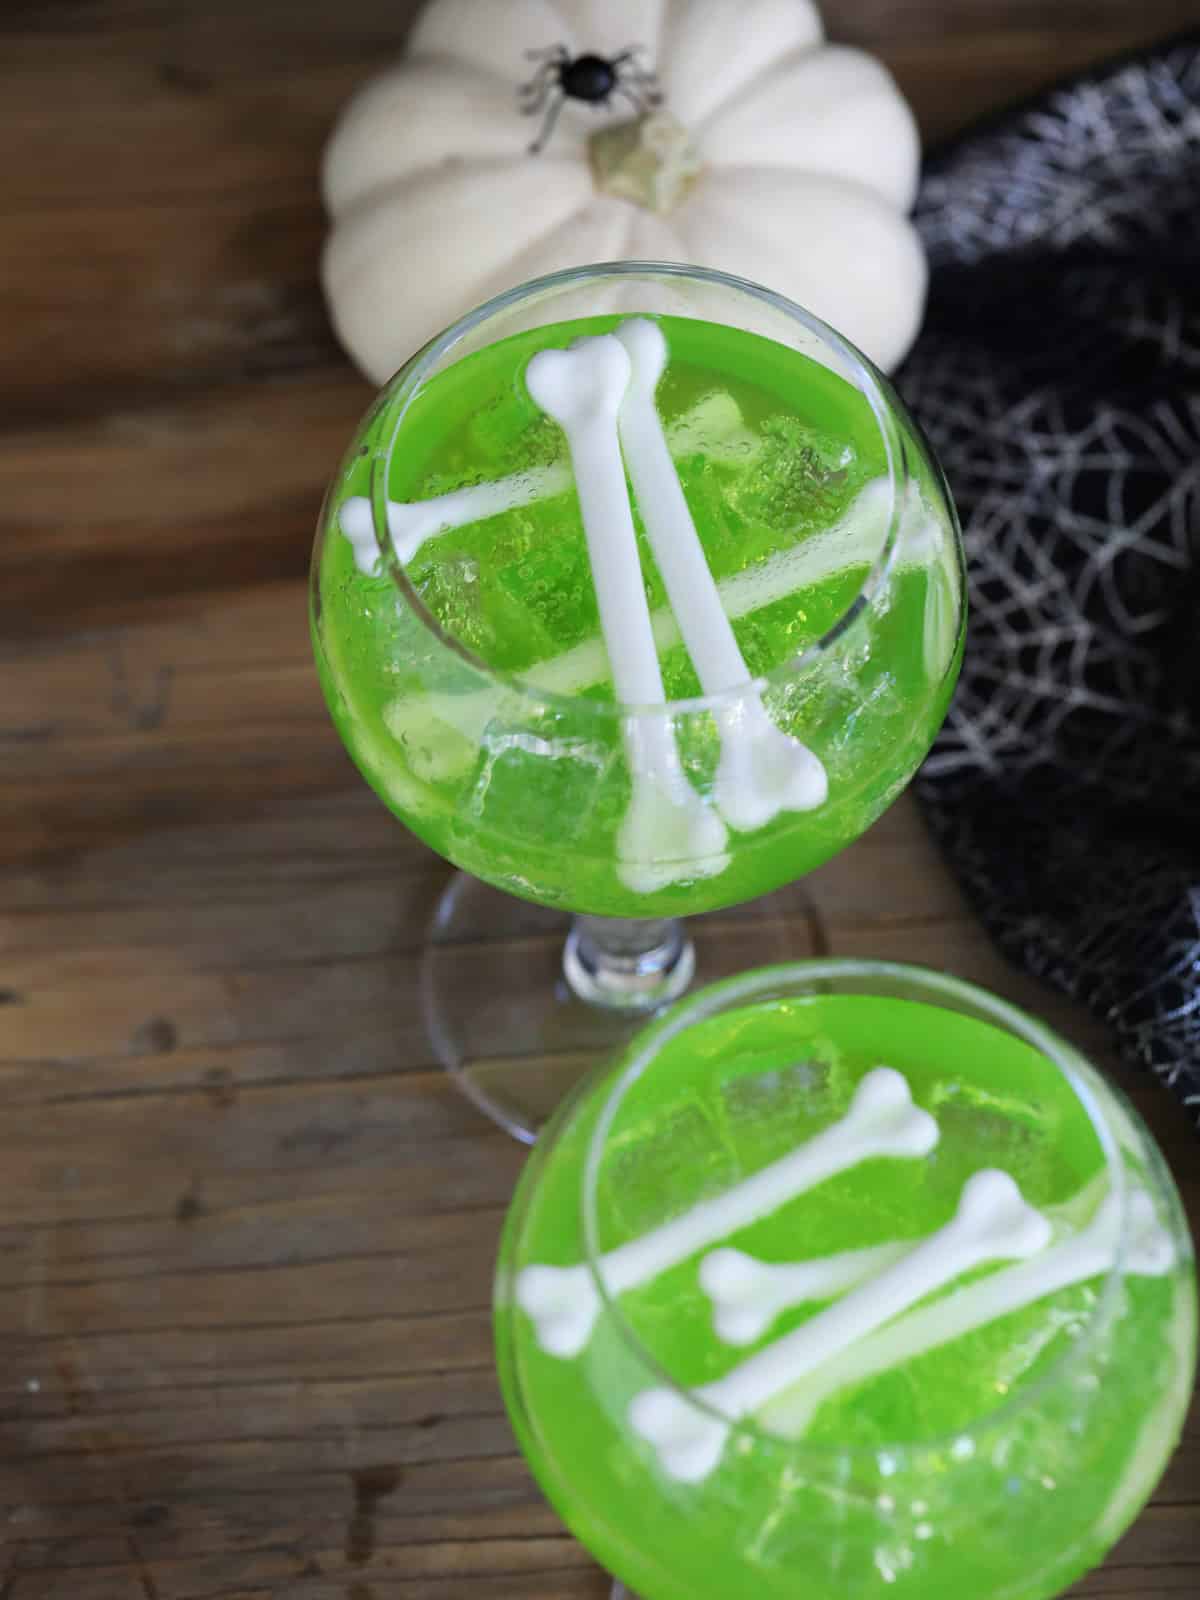 Looking down on two glasses with green Midori vodka drinks garnished with white bones.